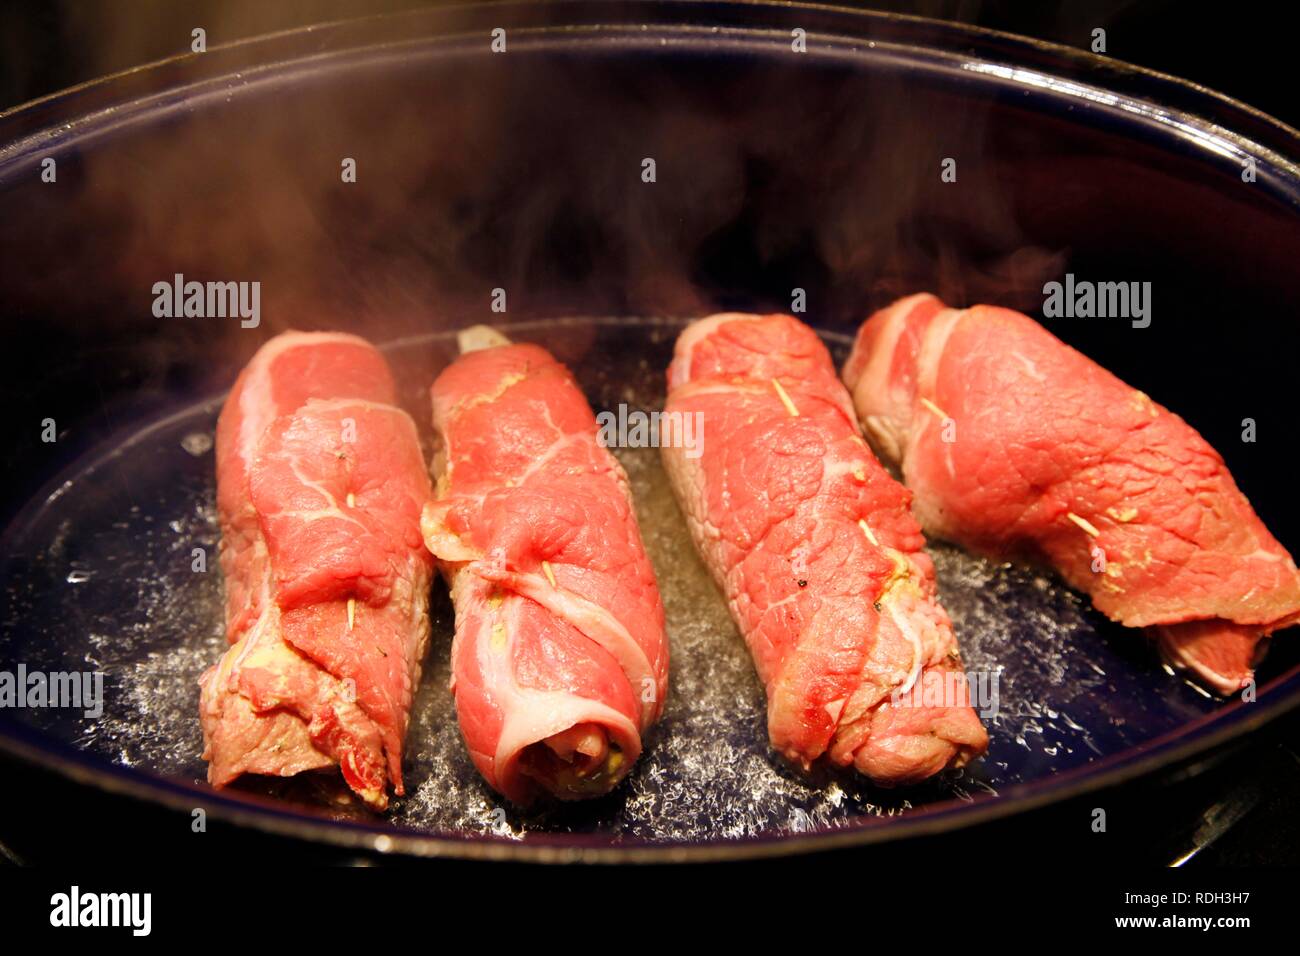 Beef roulades in a roasting dish Stock Photo